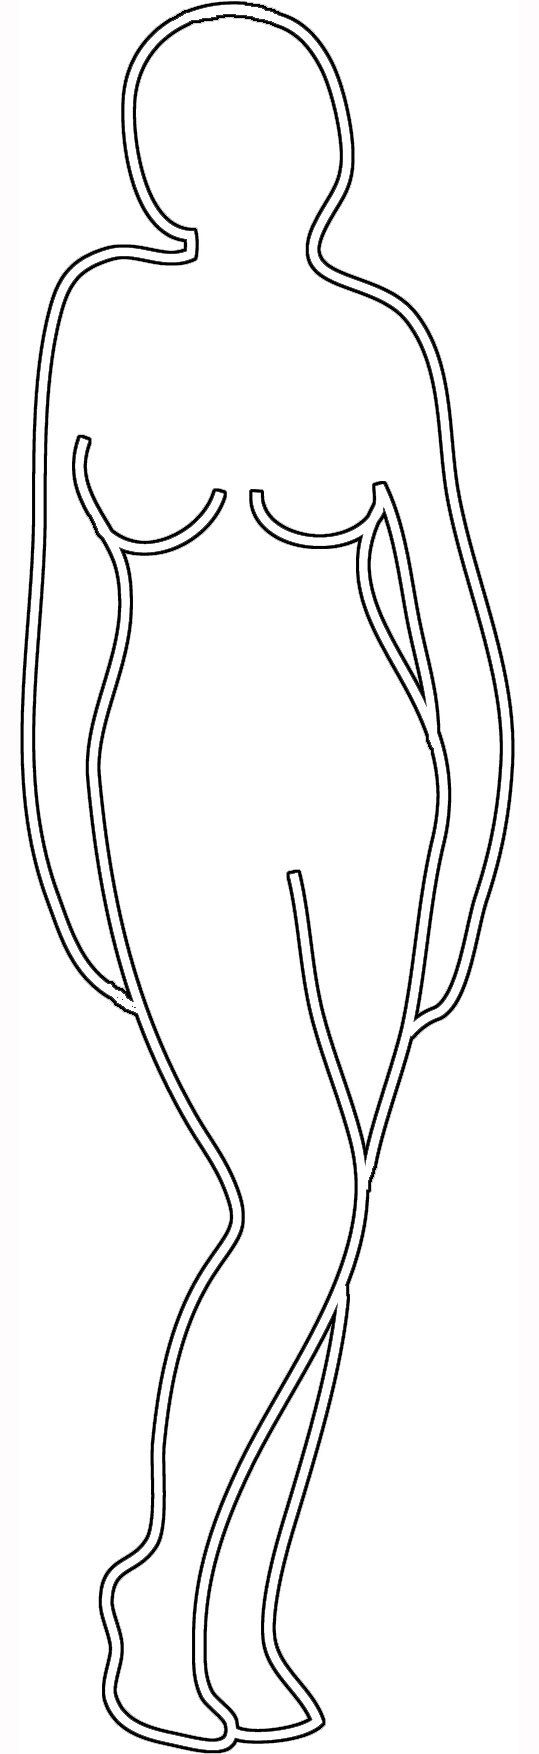 outline of woman's body